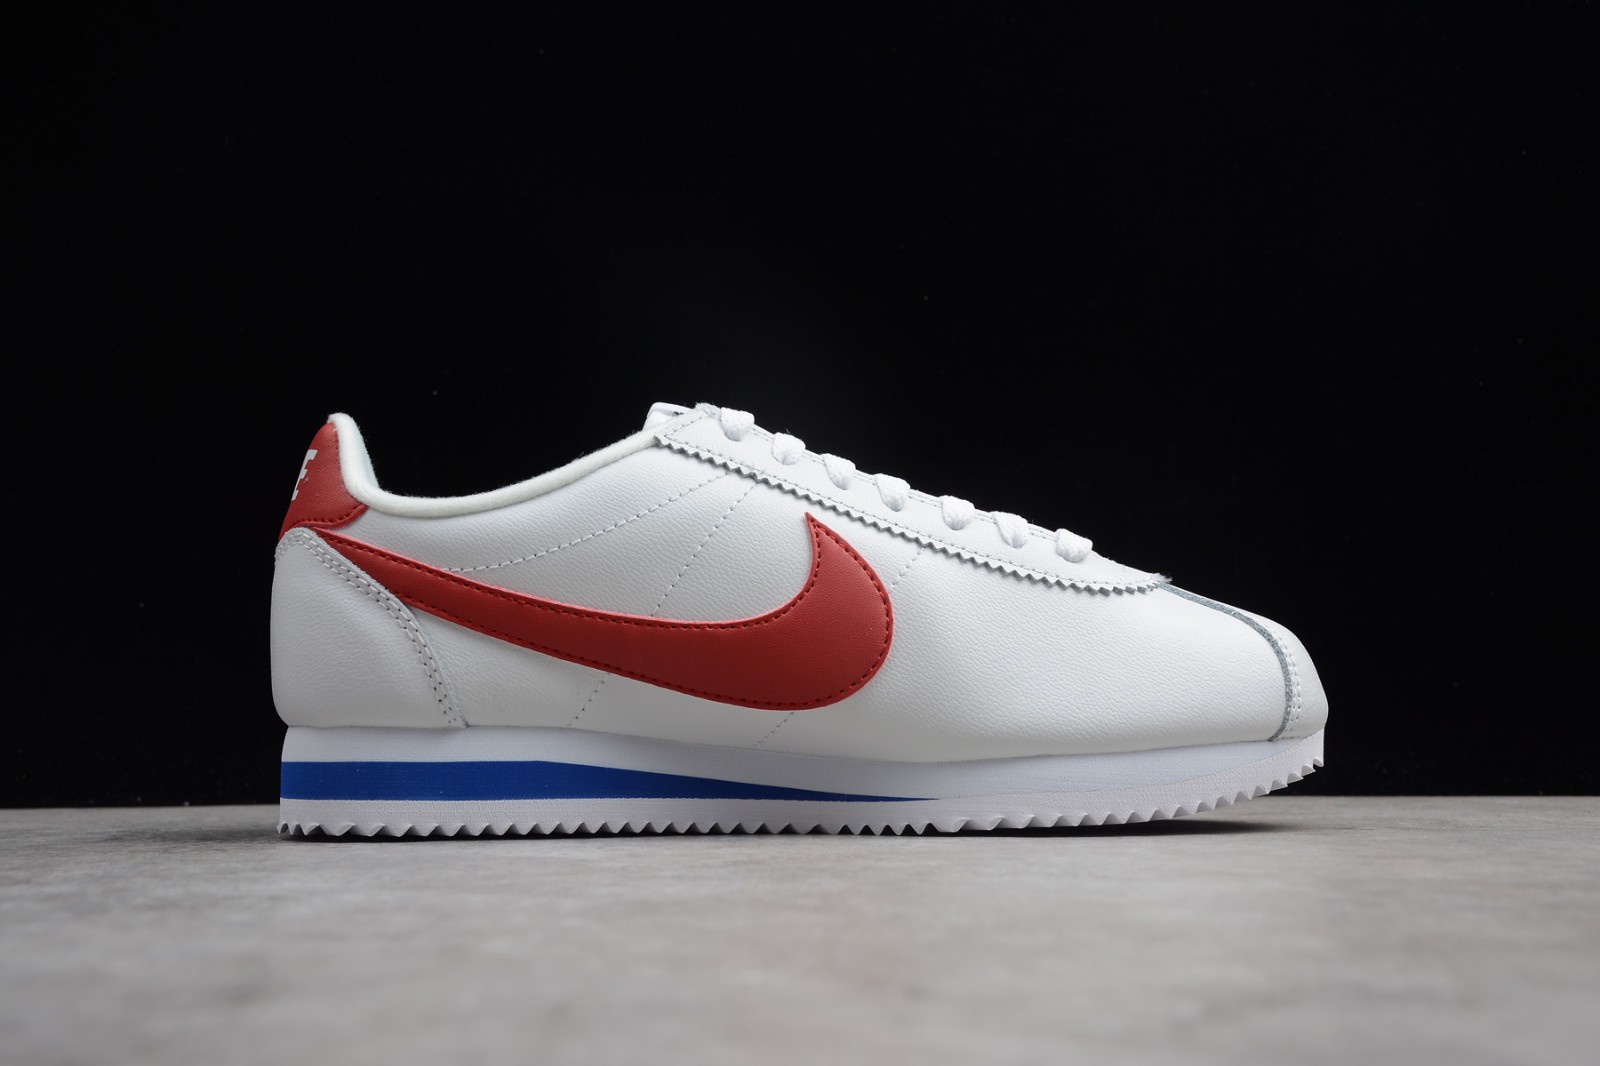 mens nike sneakers with silver swoosh blue hair - Nike Classic Cortez SE Forrest Gump White Varsity Red Varsity Royal 902801 100 MultiscaleconsultingShops